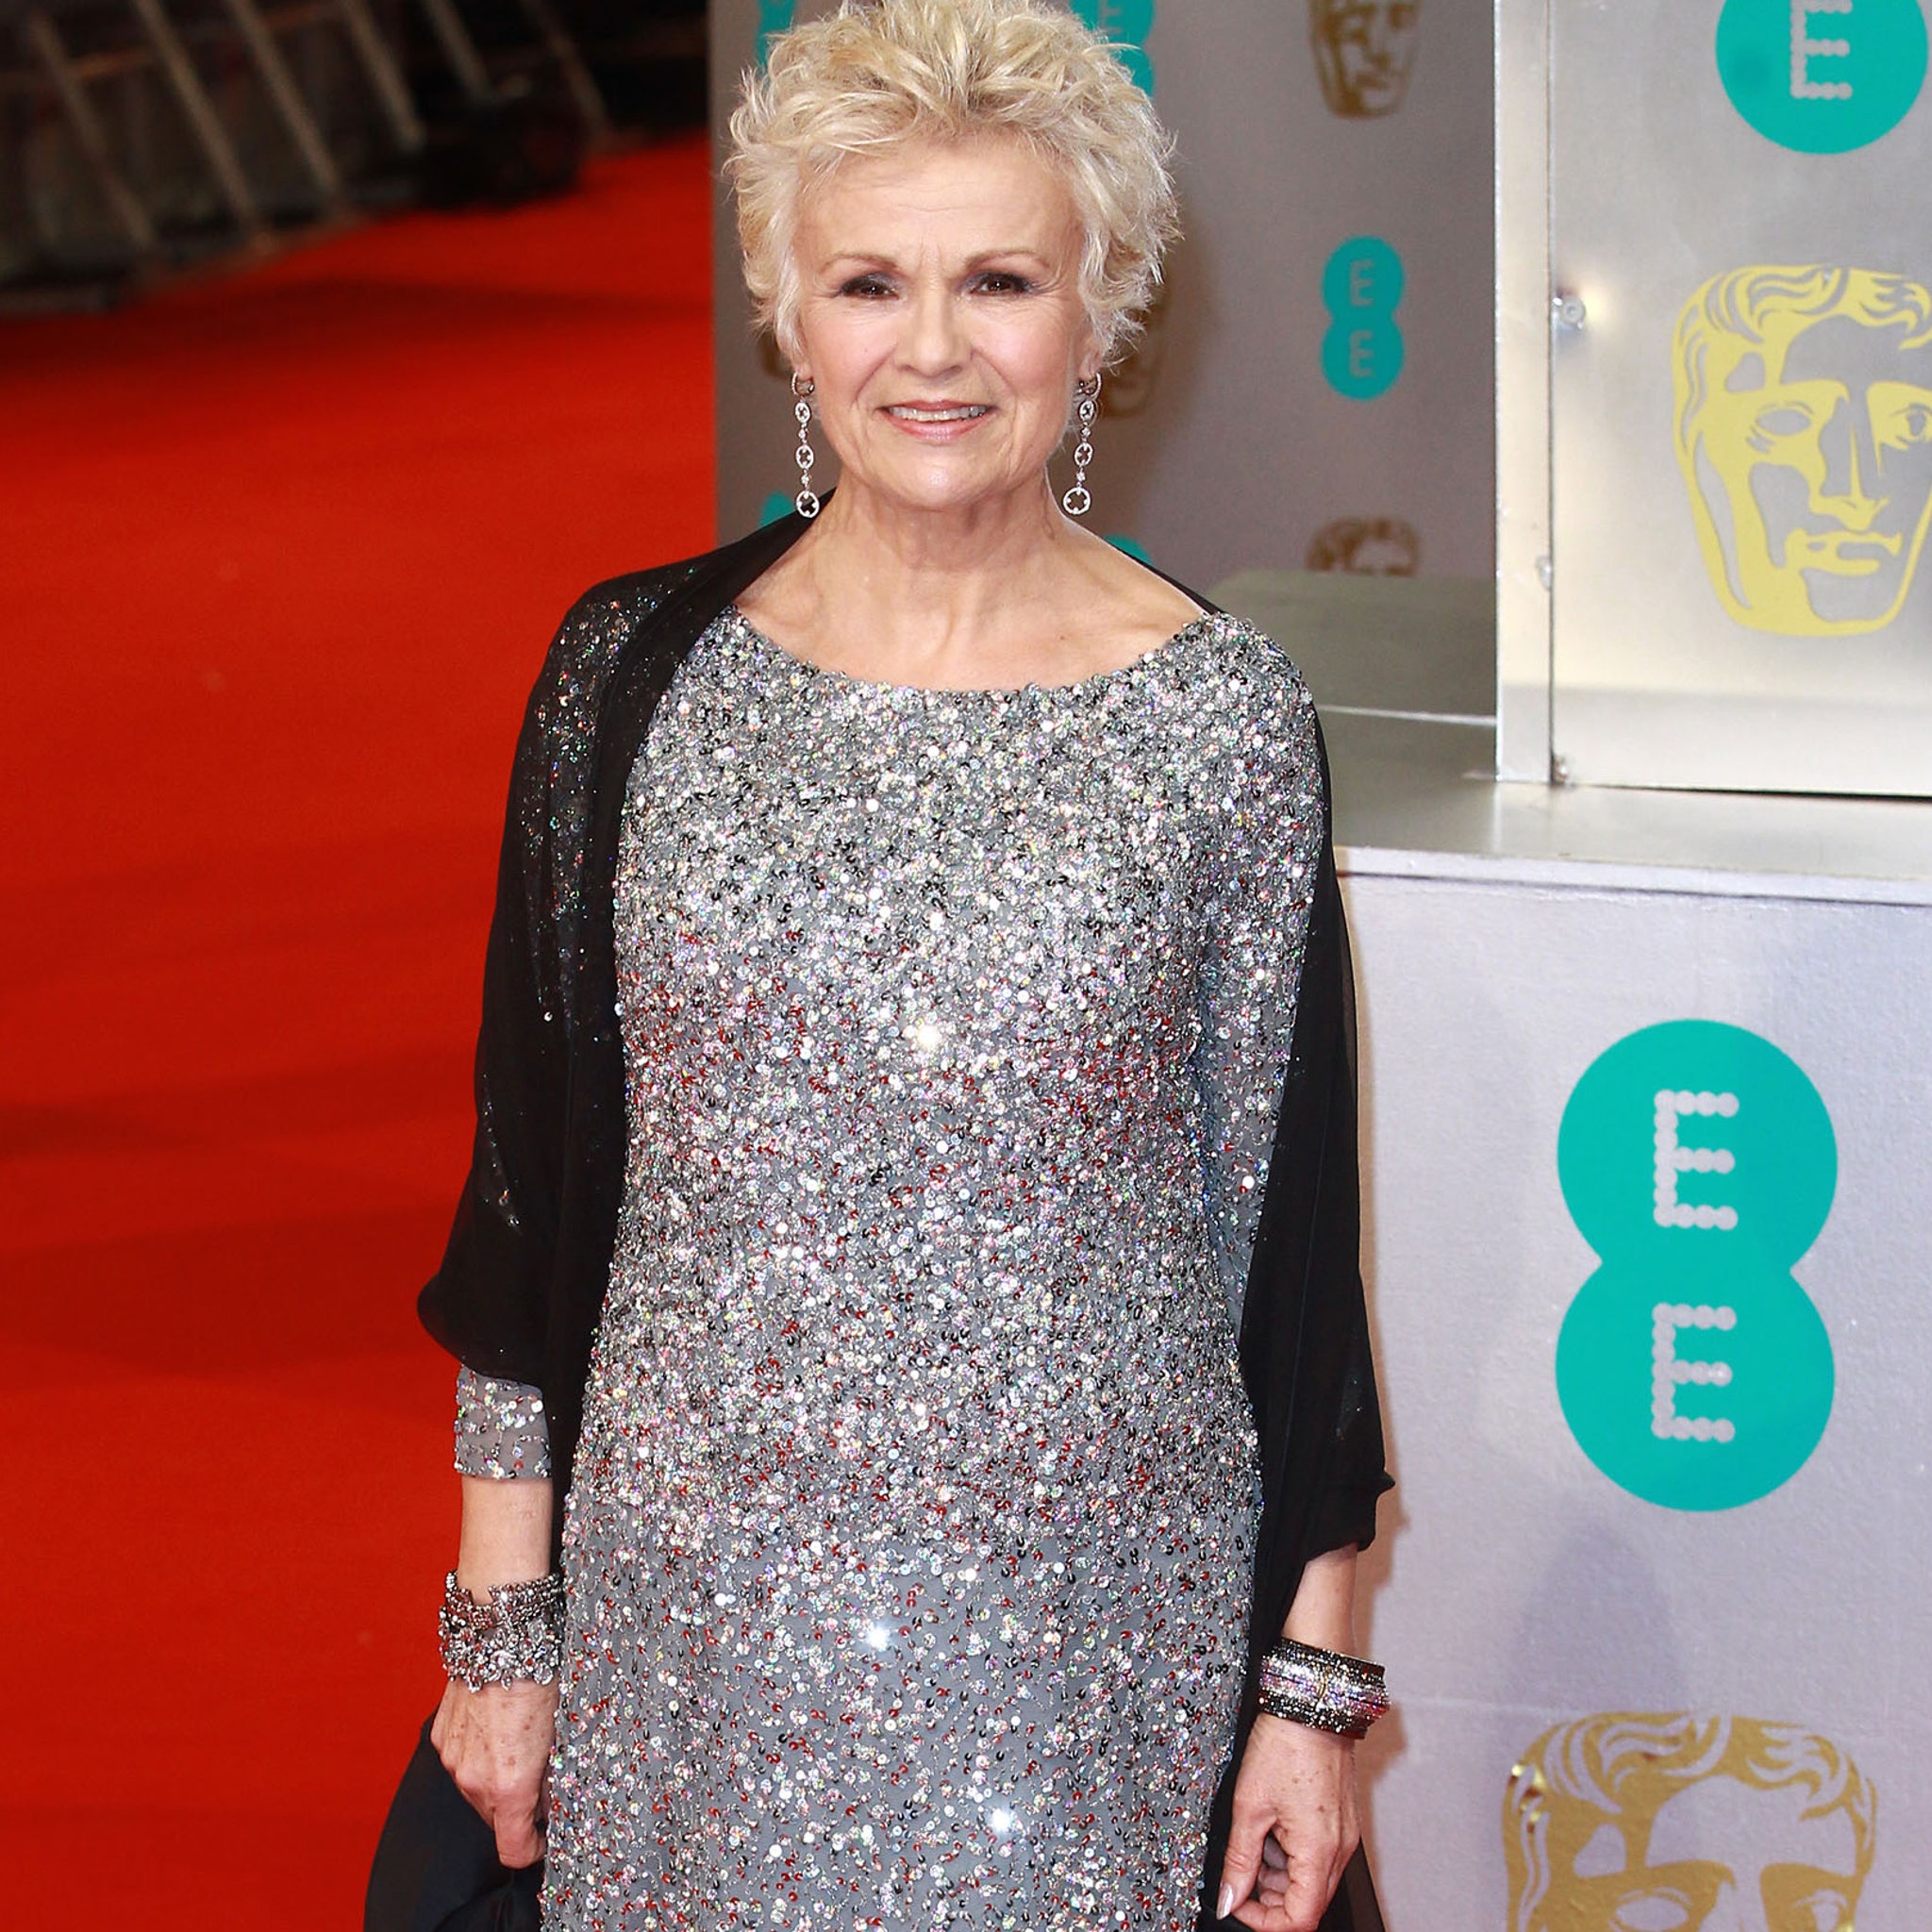 Dame Julie Walters urges government to keep its promise on dementia  research funding  Alzheimers Research UK